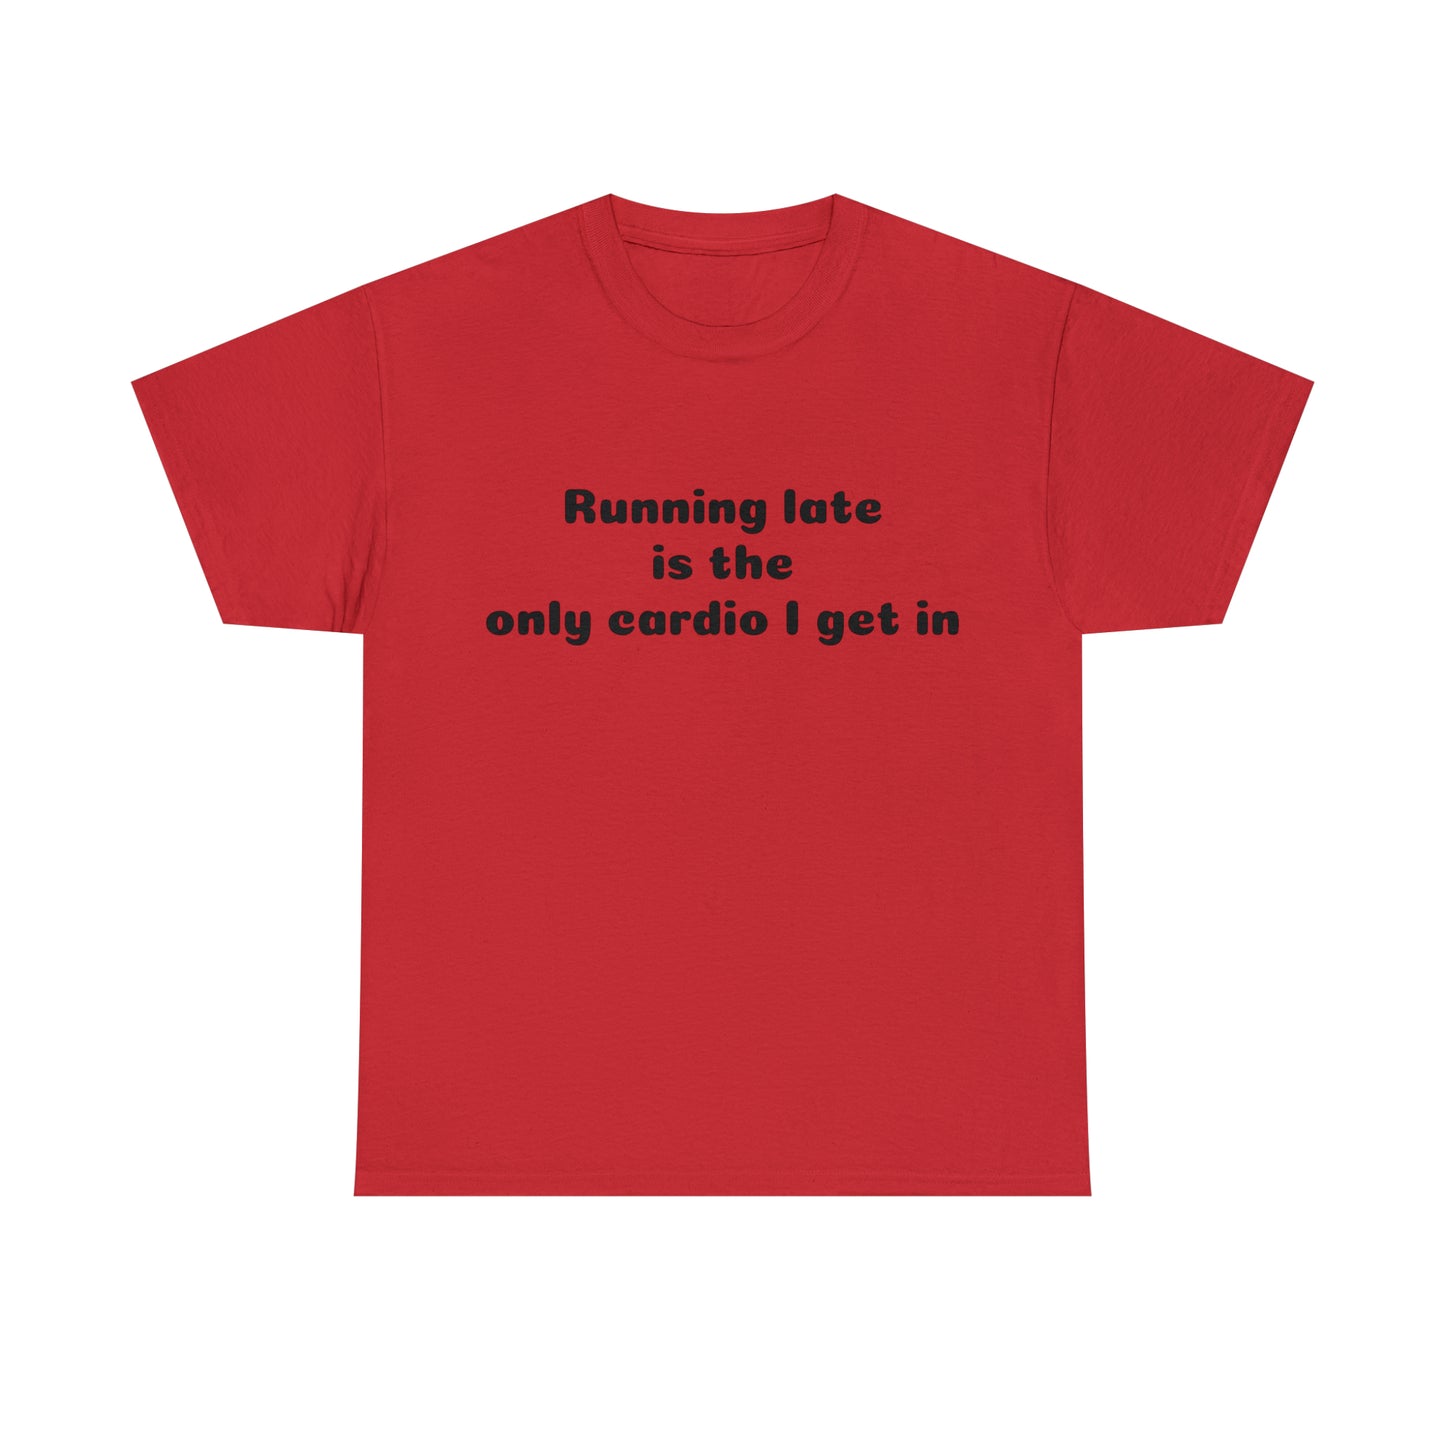 Custom Parody T-shirt, Running late is the only cardio I get in shirt design